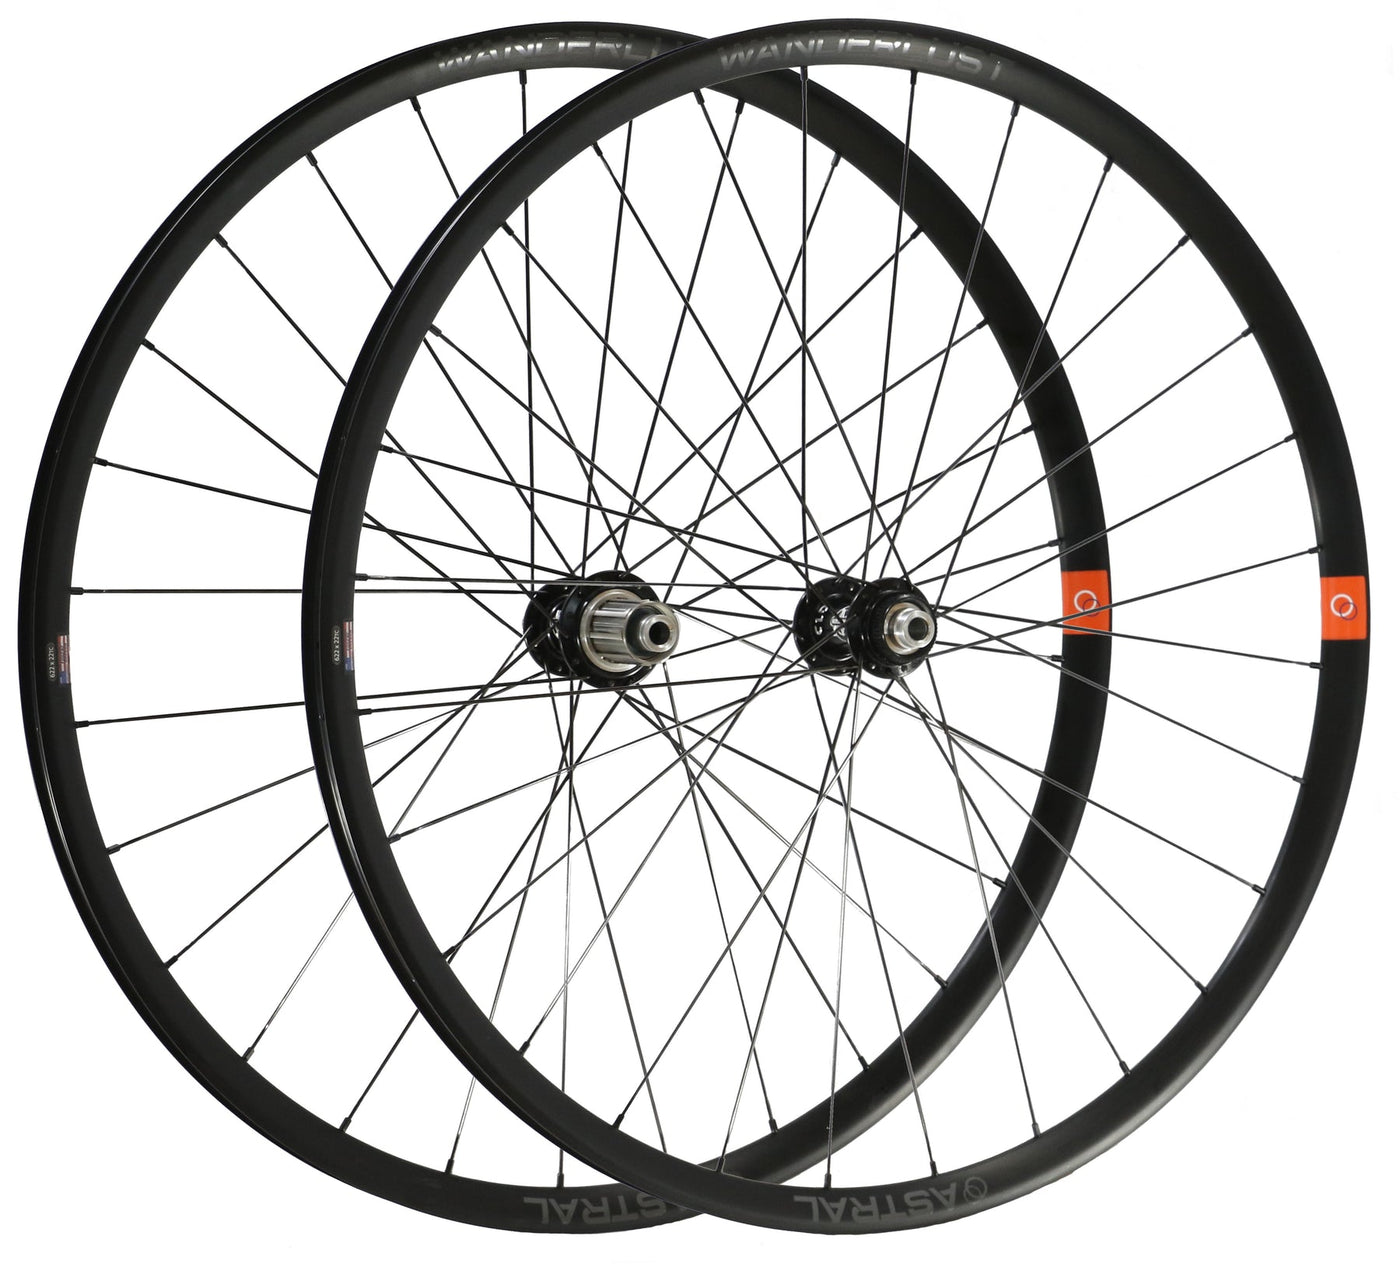 Astral Wanderlust Alloy Disc Rims to Astral Approach CL Hubs